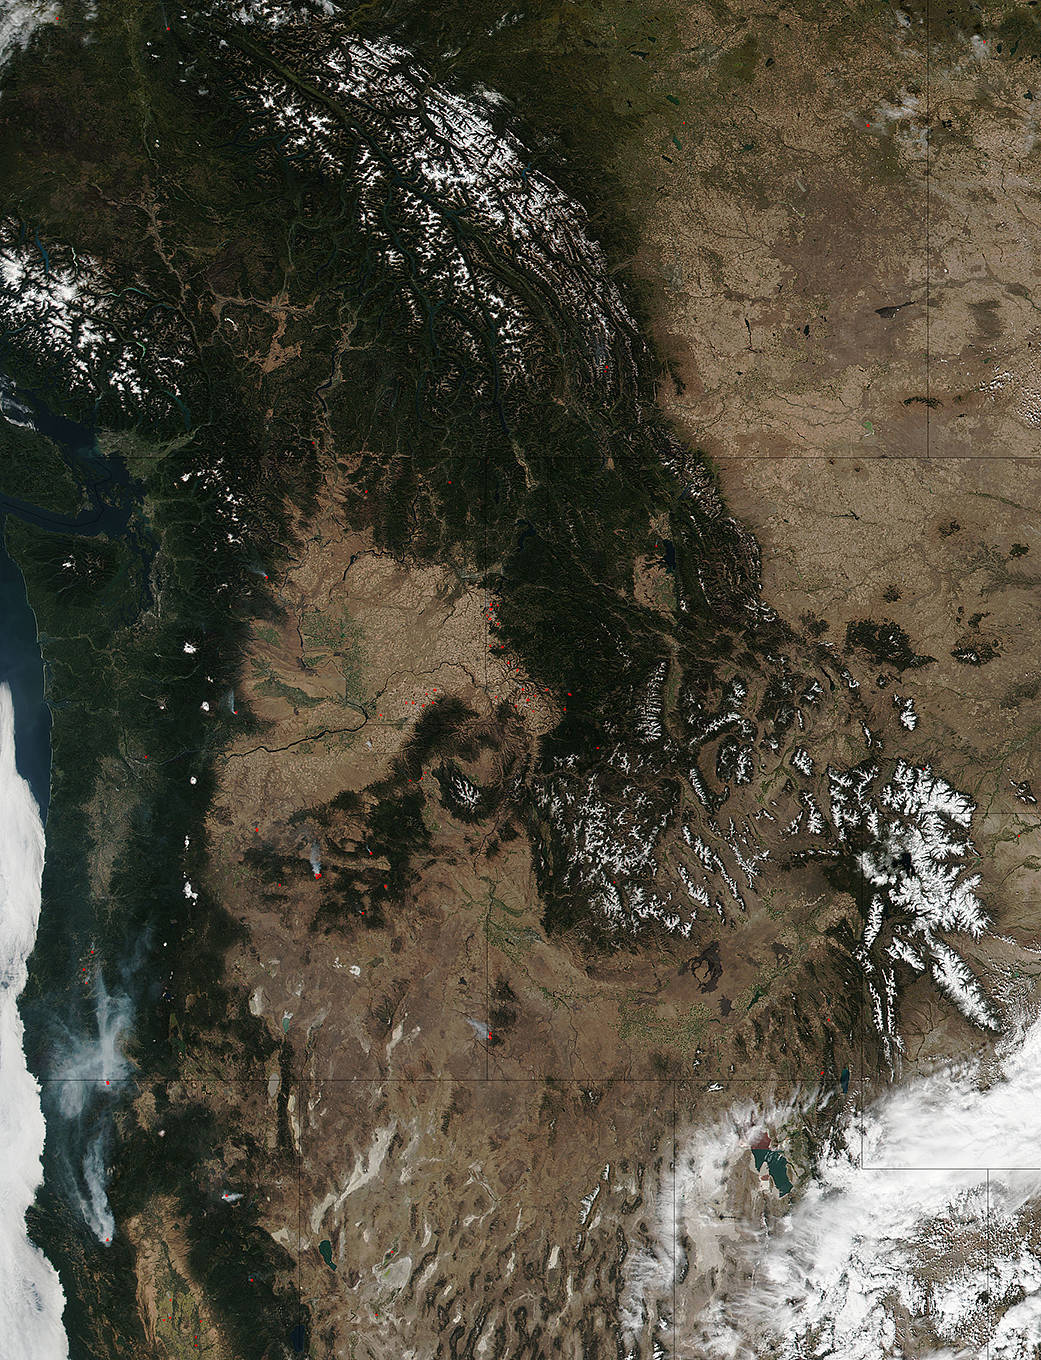 fires and snow in the Pacific Northwest